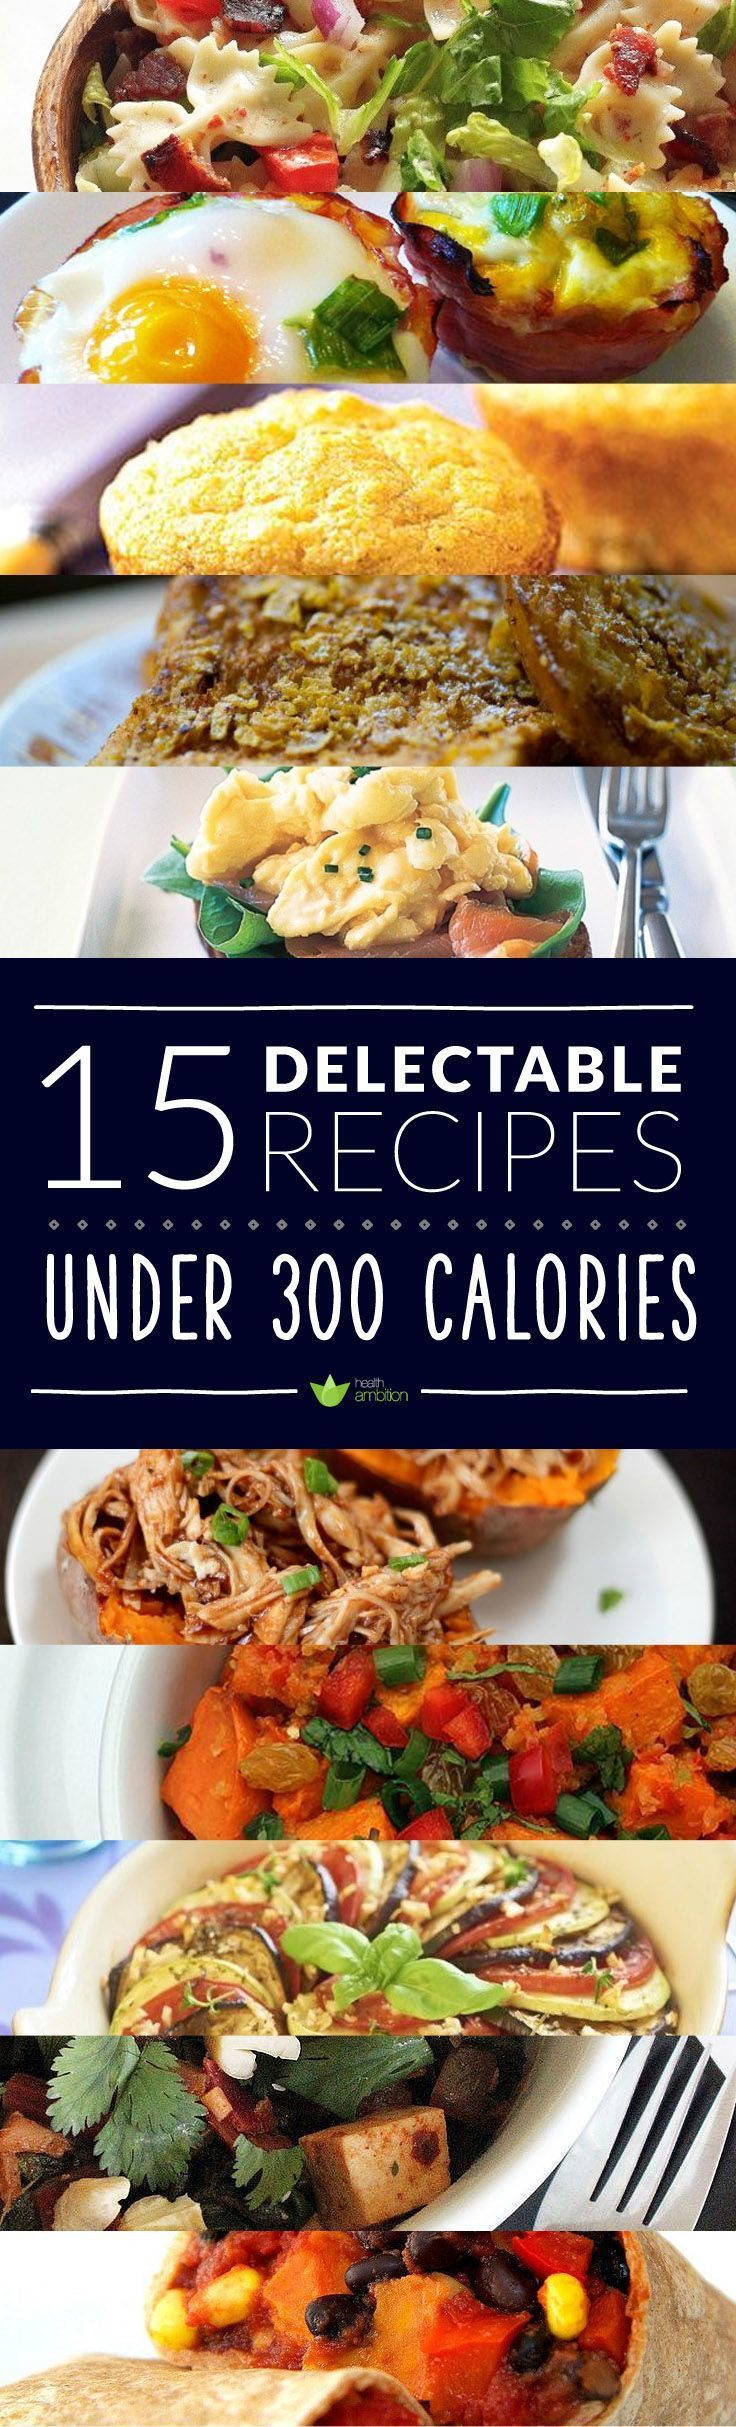 Healthy Lunches Under 300 Calories
 Best 20 300 Calorie Recipes ideas on Pinterest